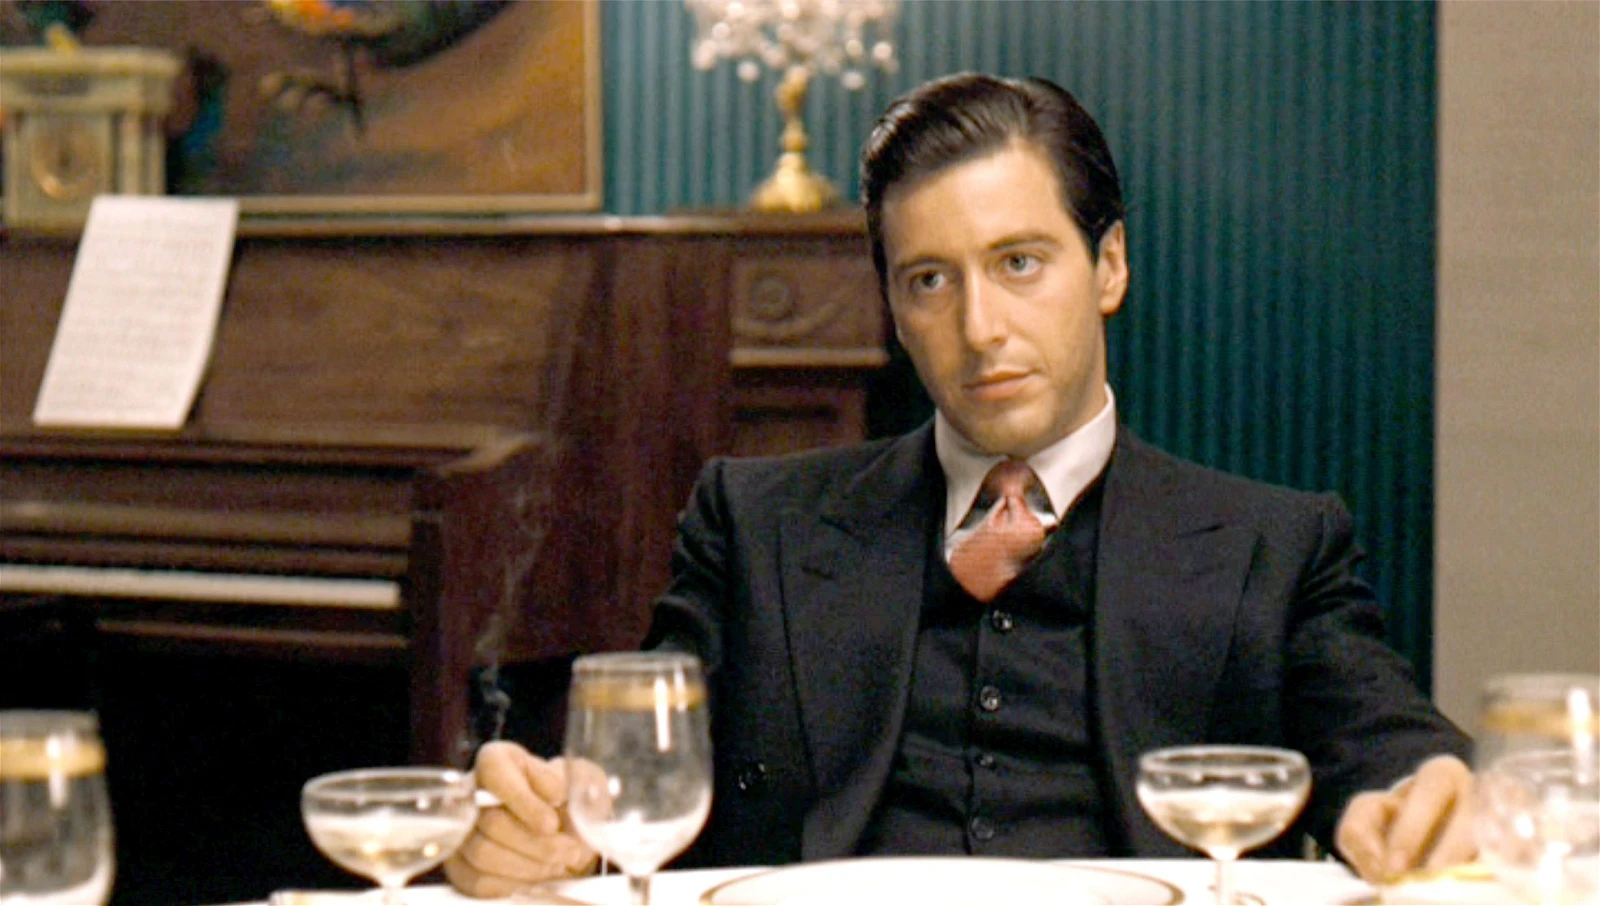 Al Pacino Opens Up About Early Challenges While Filming 'The Godfather